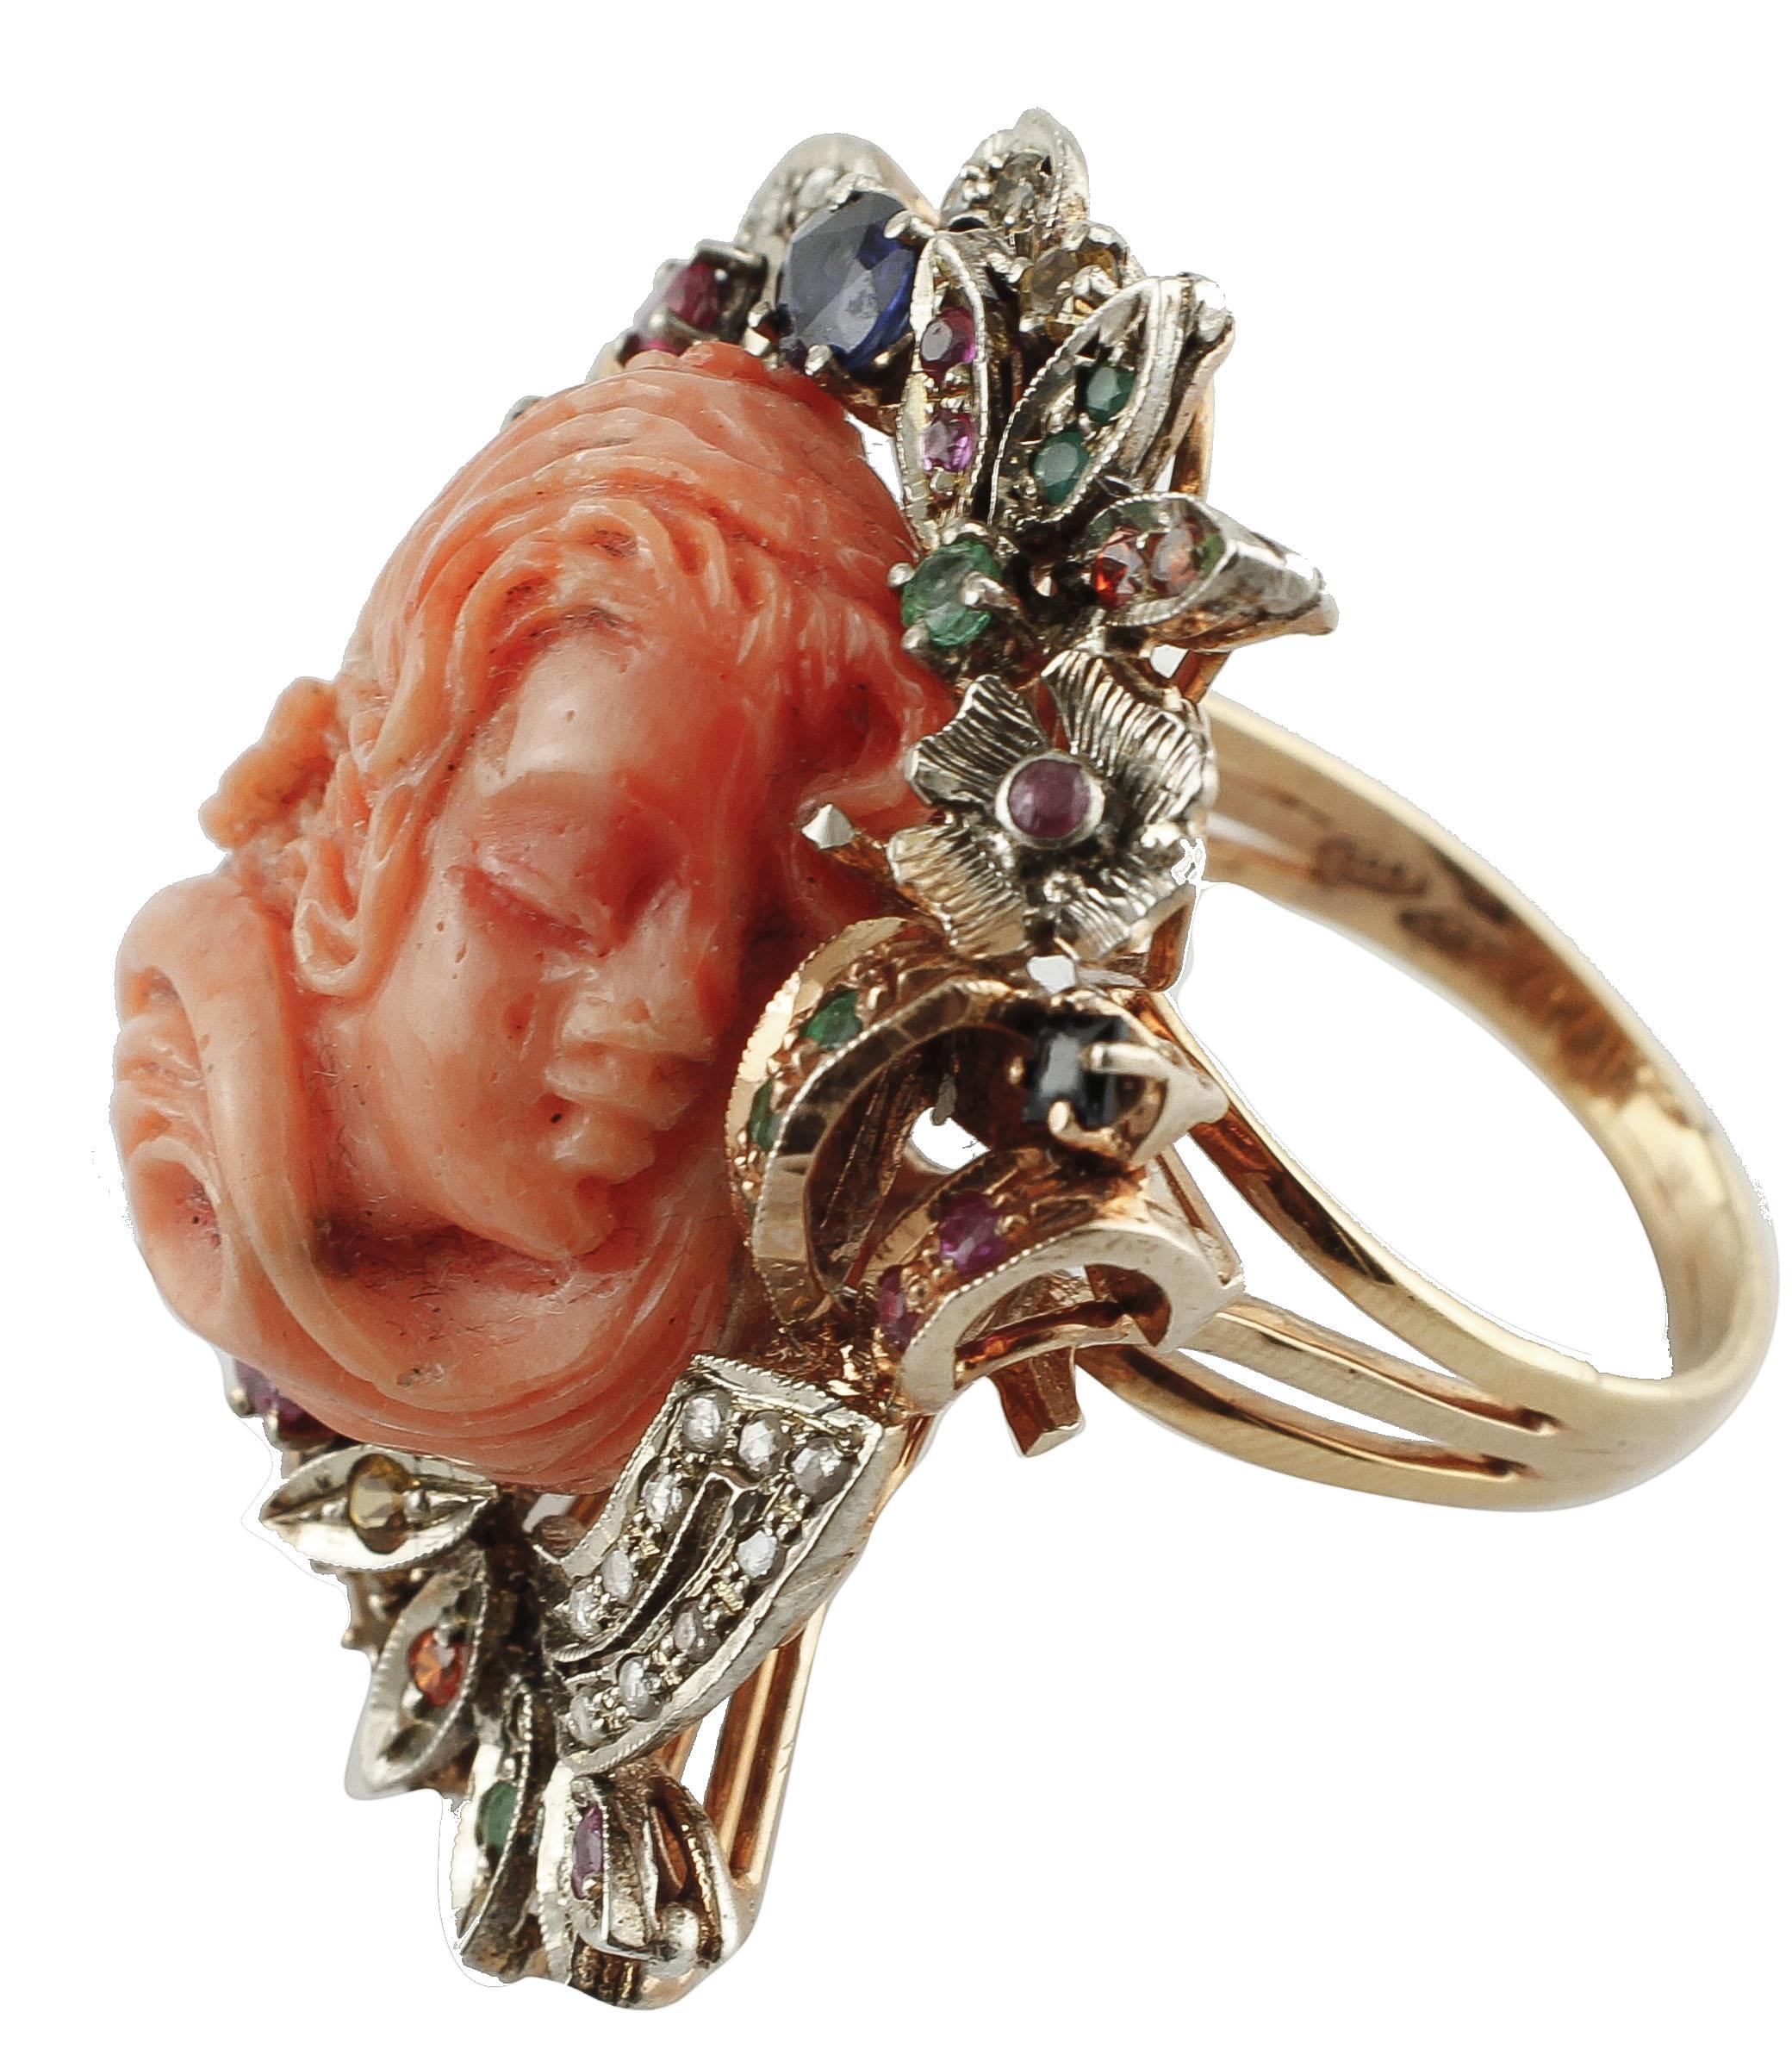 Marvelous ring in 9k rose gold and silver structure, mounted with a central finely carved elatius coral, surrounded by flowery details in rose gold and silver studded with diamonds, rubies, emeralds and multicolored sapphires.
This ring is totally